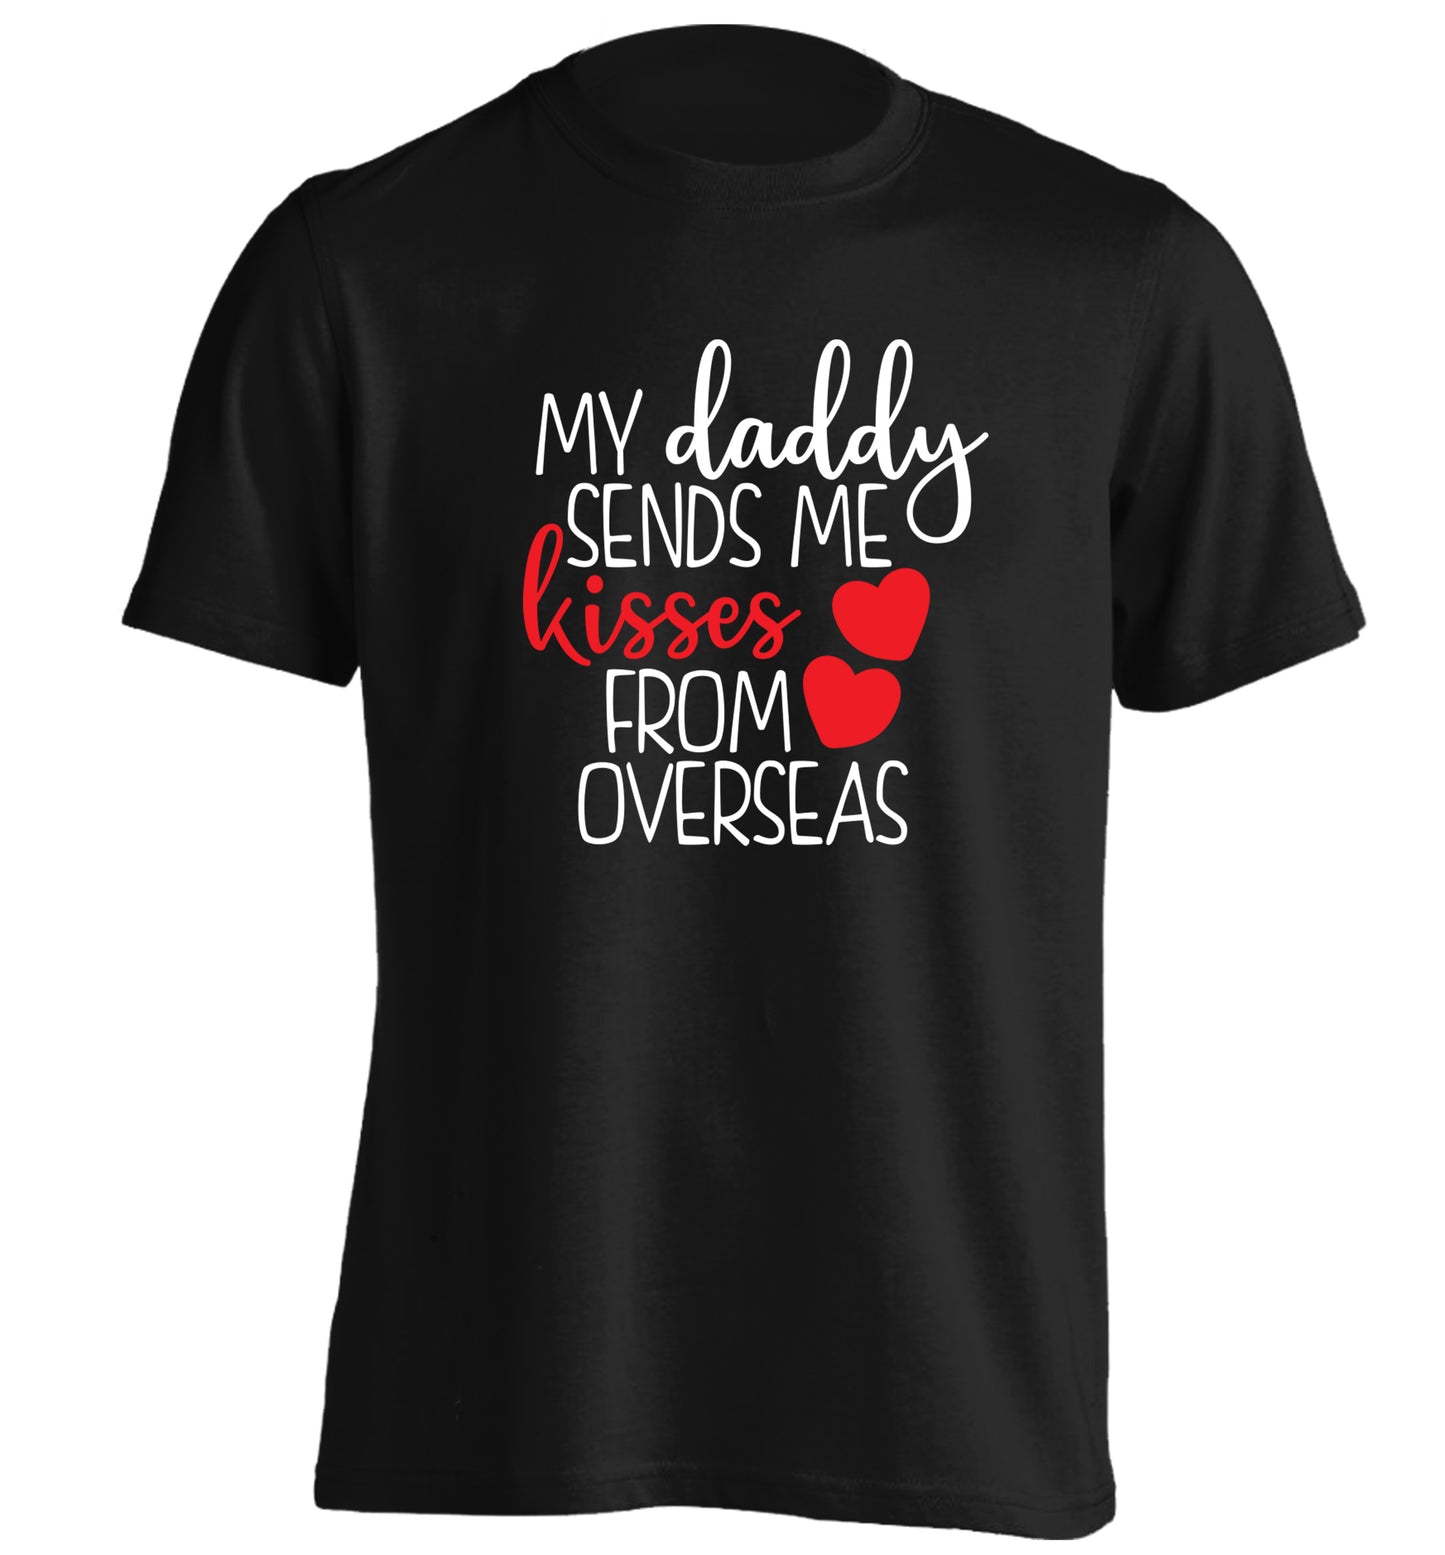 My daddy sends me kisses from overseas adults unisex black Tshirt 2XL